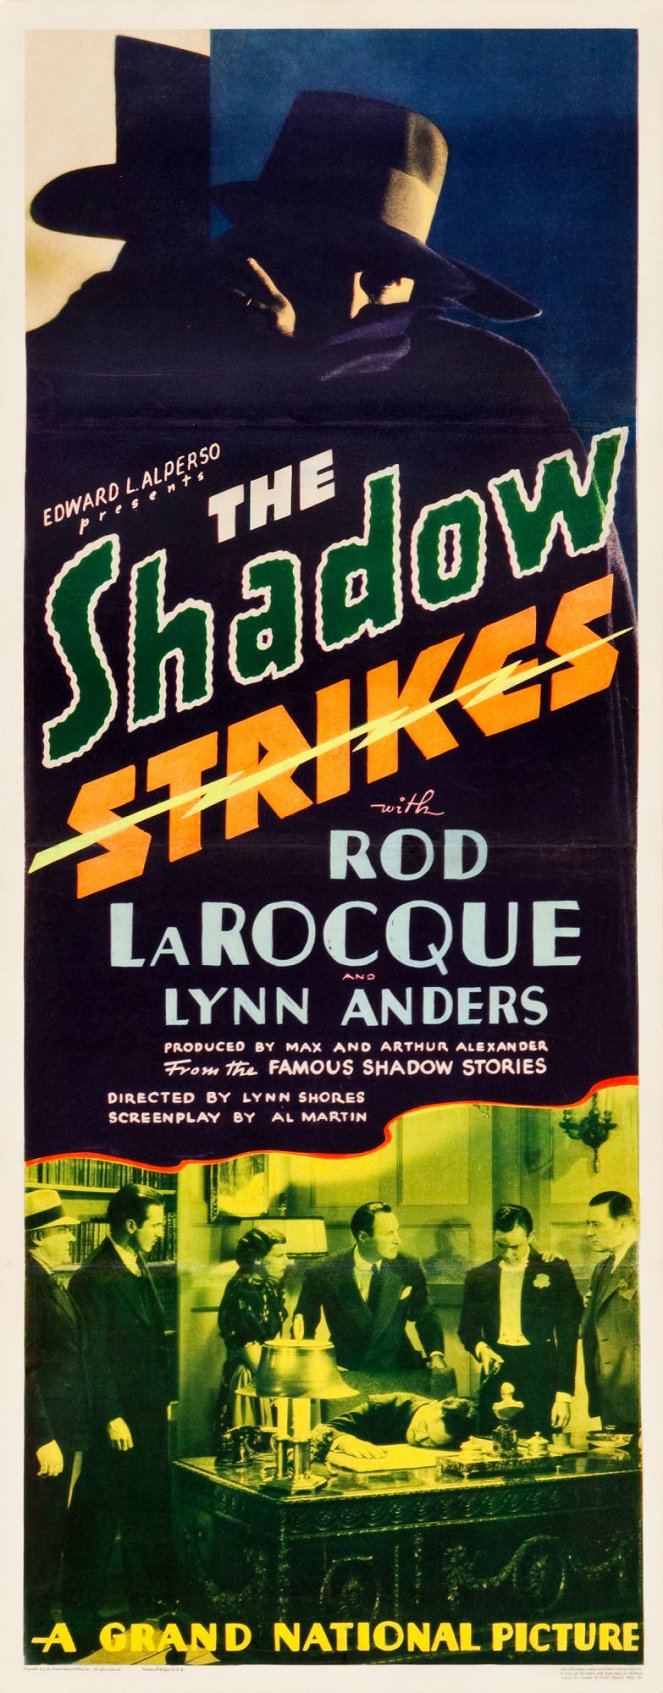 The Shadow Strikes - Affiches